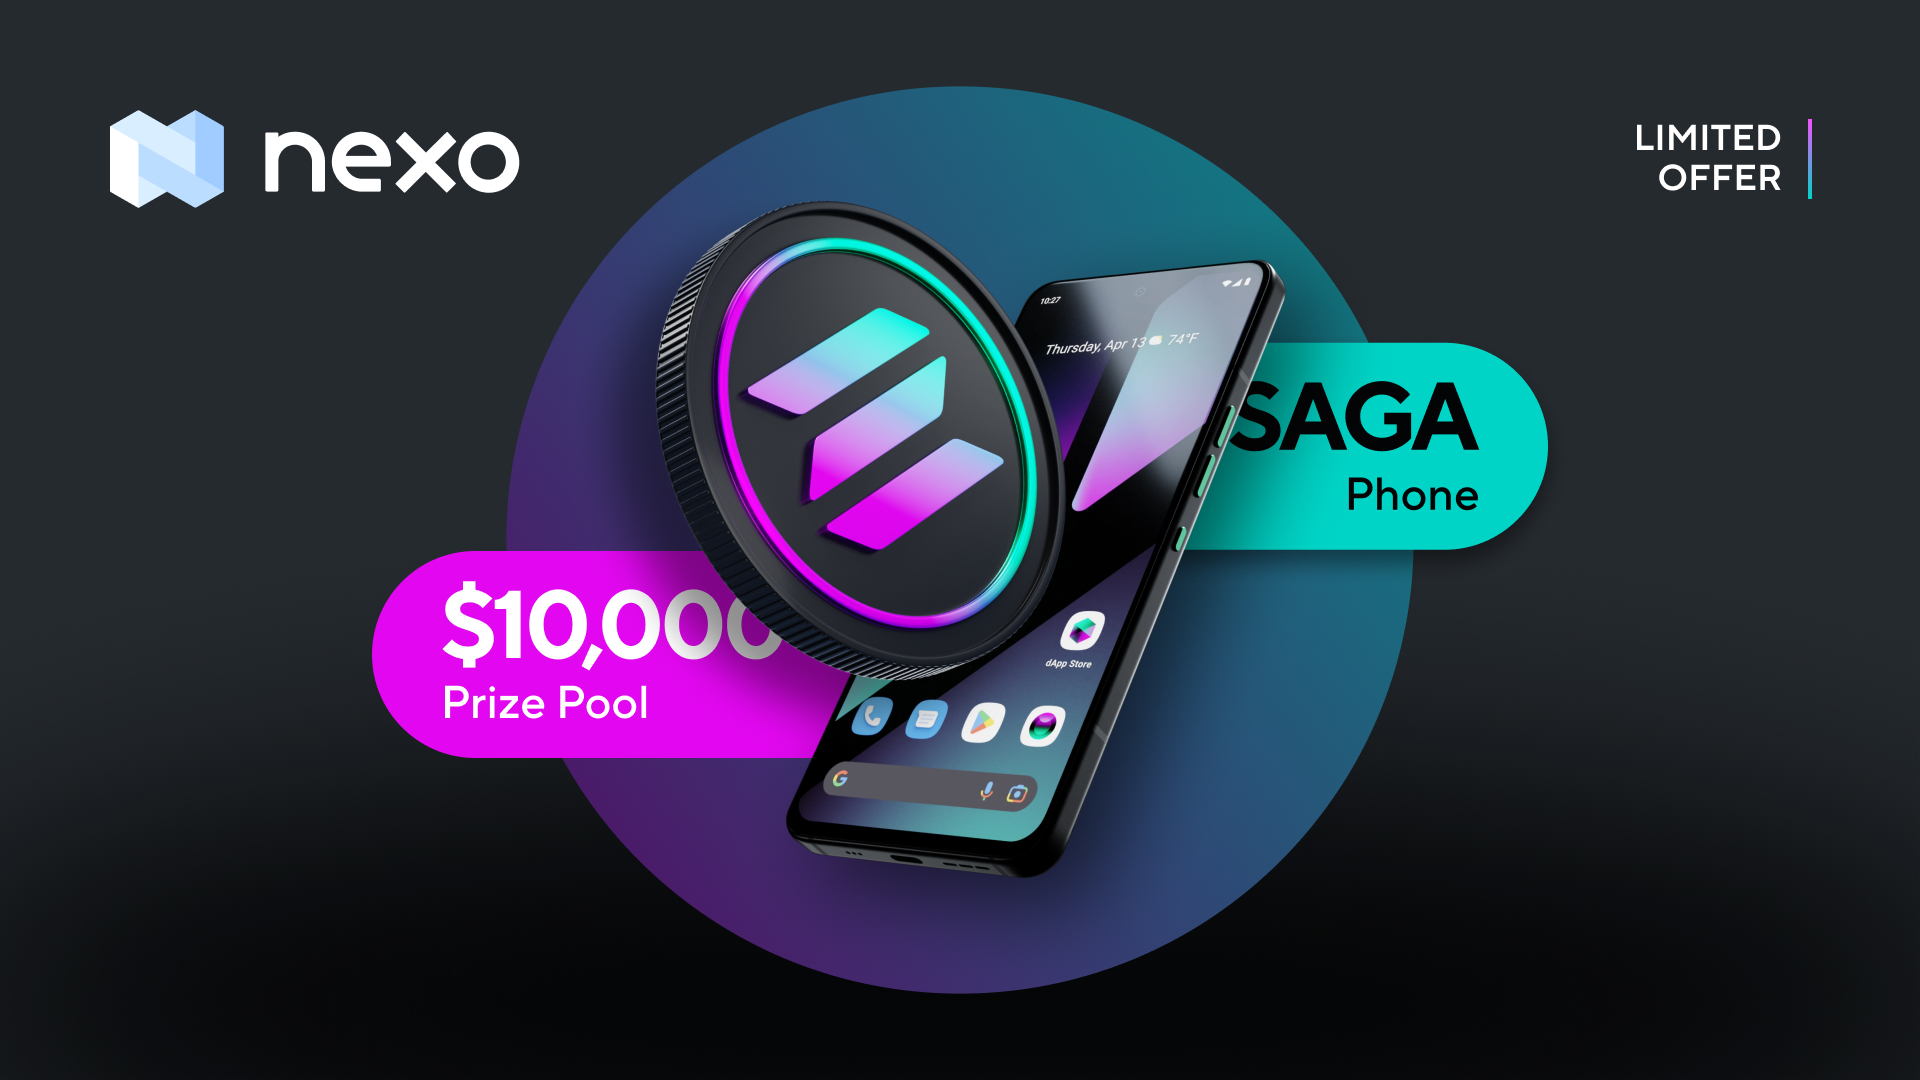 Win from our $10,000 Prize Pool or a Saga Phone